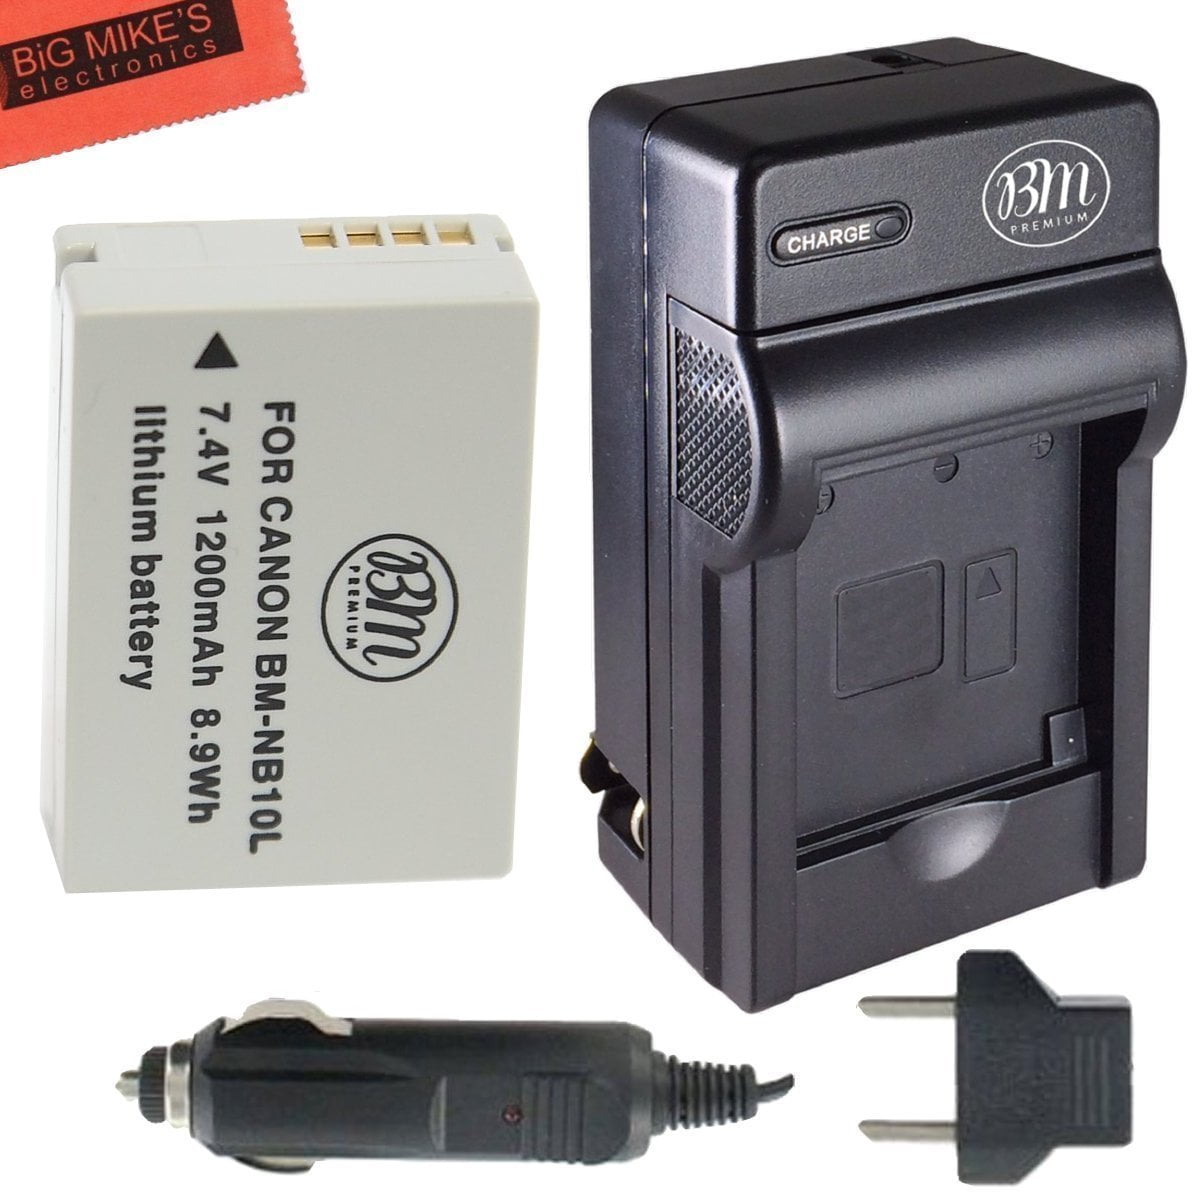 NB-10L High-Capacity Battery Complete Starter Kit SX40 HS Cameras G15 Car/Home Charger For Canon PowerShot SX50 HS SX60 & More. G1 X G16 